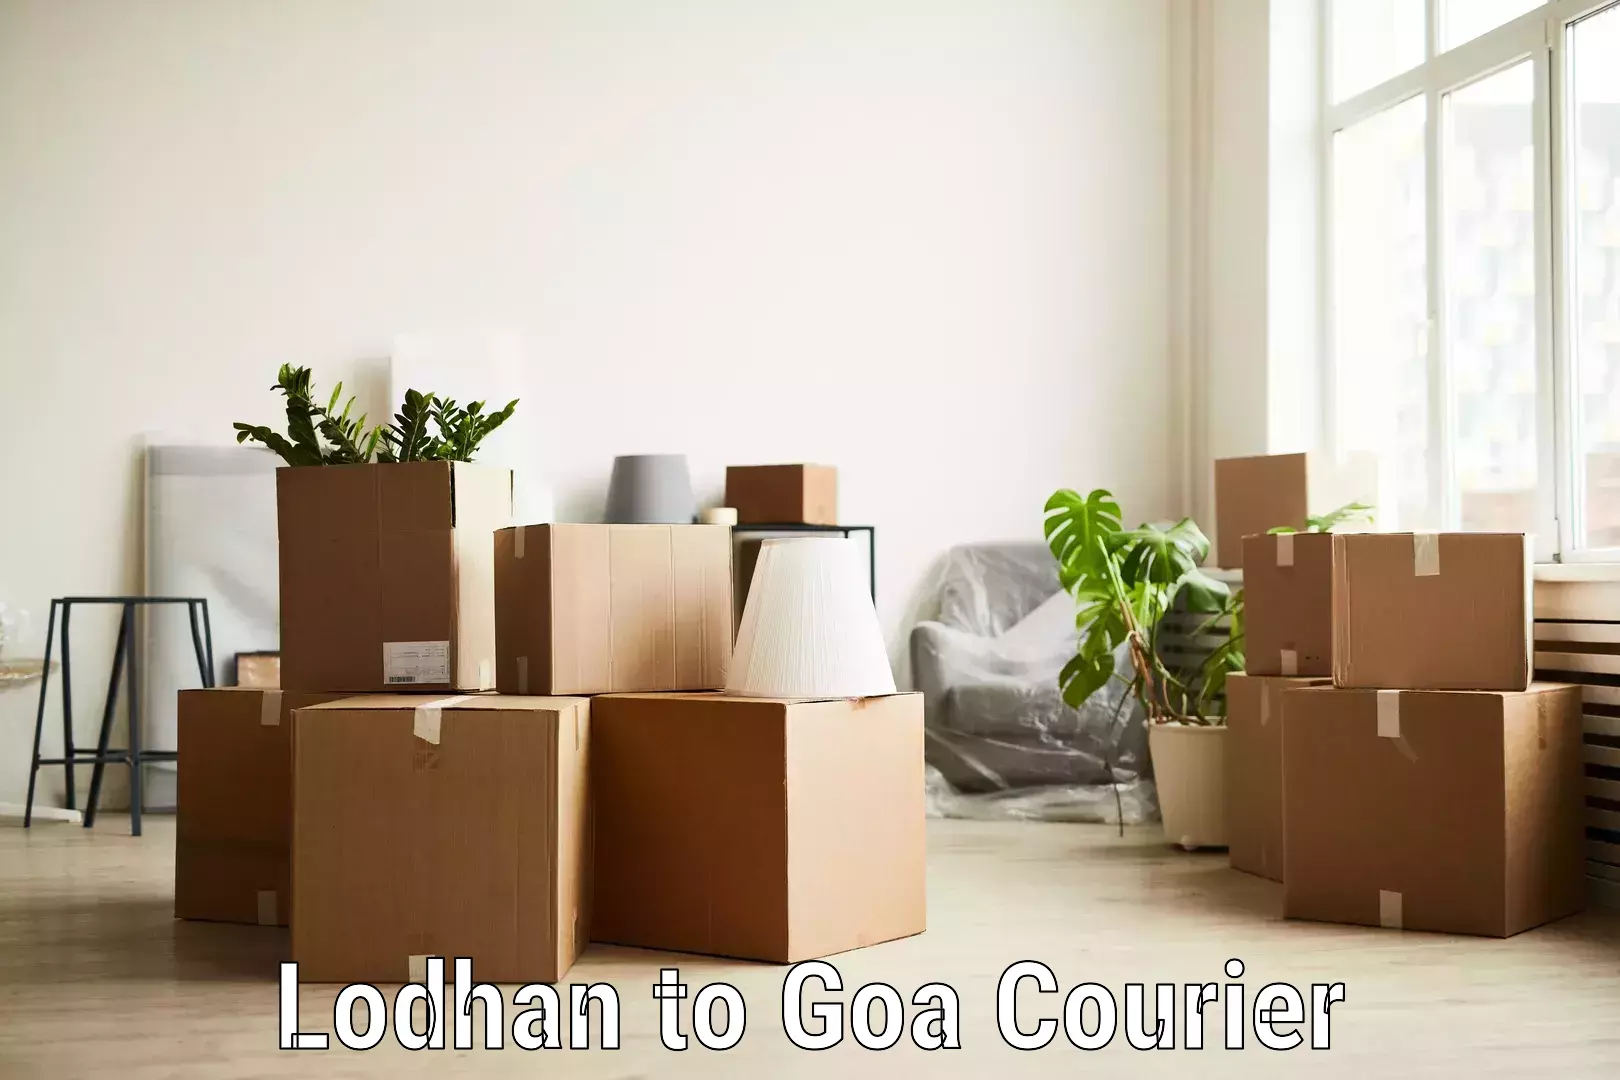 Fast delivery service Lodhan to Panaji